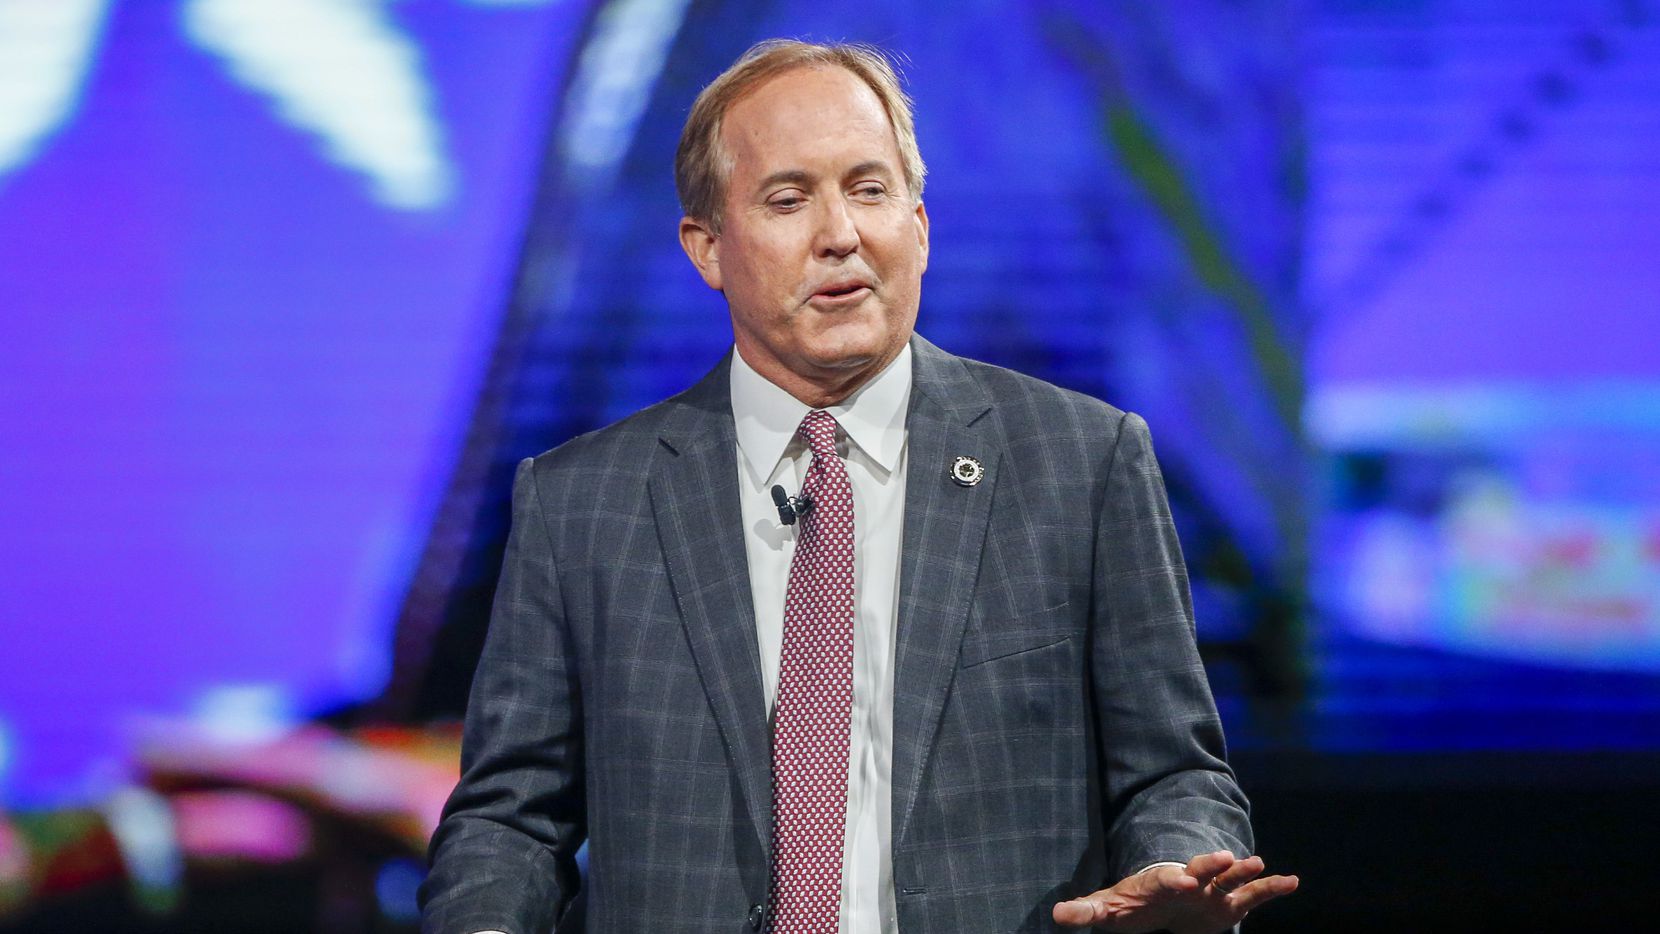 Texas Attorney General Ken Paxton at the Conservative Political Action Conference on Sunday, July 11, 2021, in Dallas. (Elias Valverde II/The Dallas Morning News)